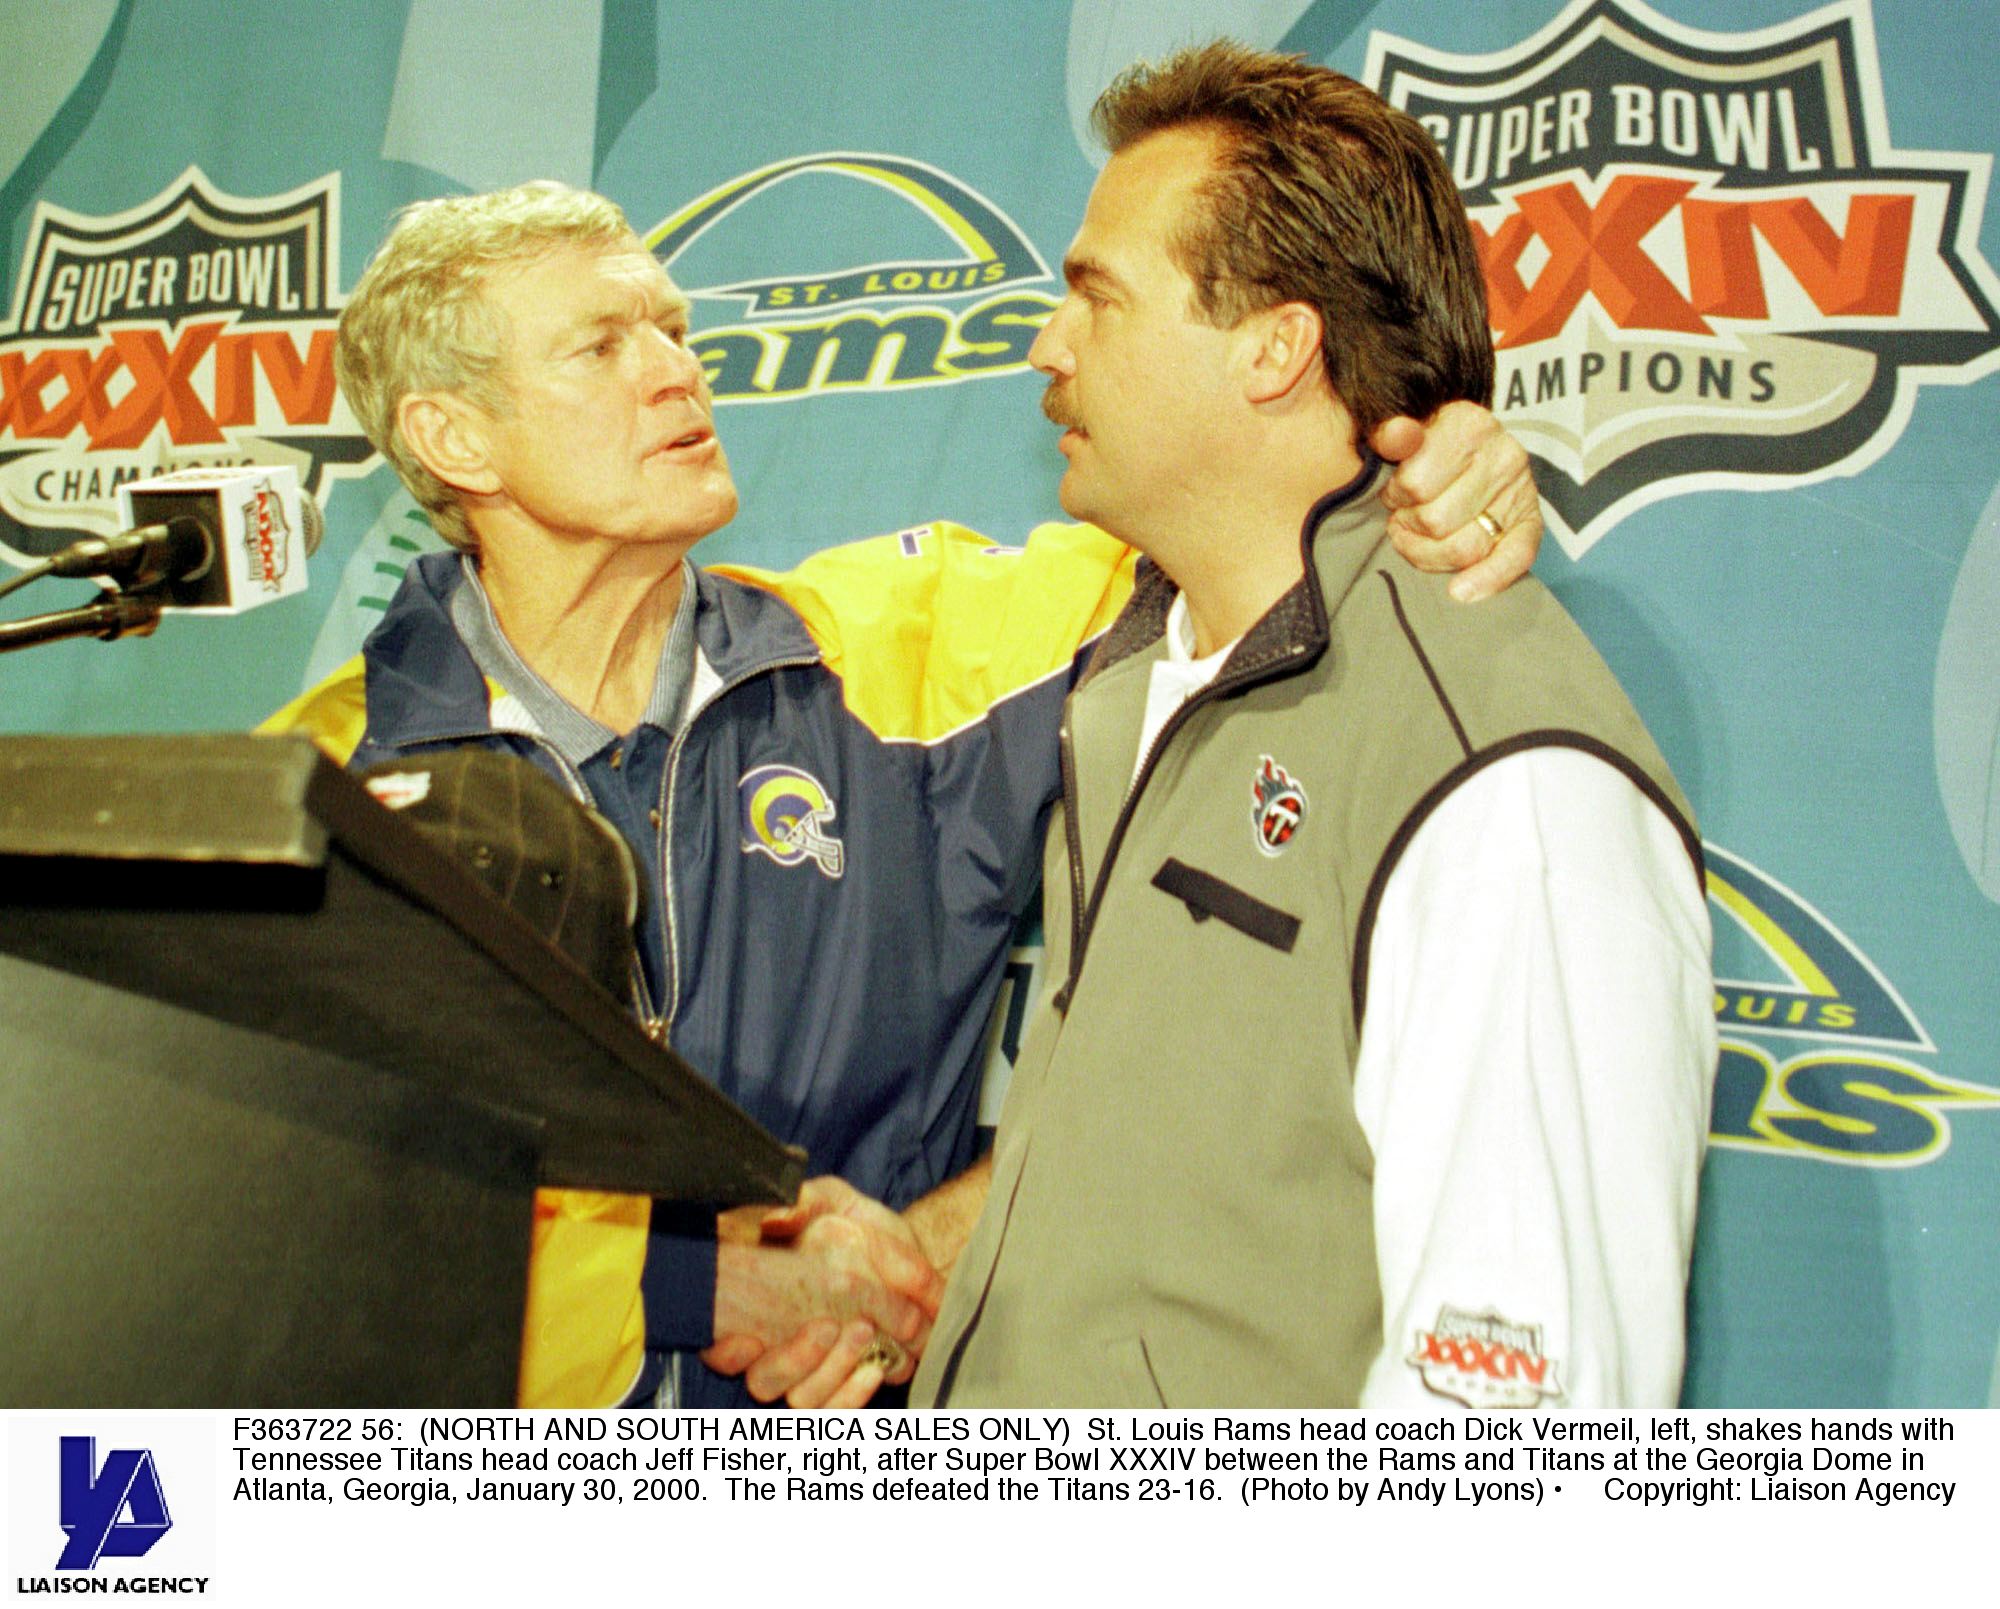 F363722 56: (NORTH AND SOUTH AMERICA SALES ONLY) St. Louis Rams head coach Dick Vermeil, left, shakes hands with Tennessee Titans head coach Jeff Fisher, right, after Super Bowl XXXIV between the Rams and Titans at the Georgia Dome in Atlanta, Georgia, Ja